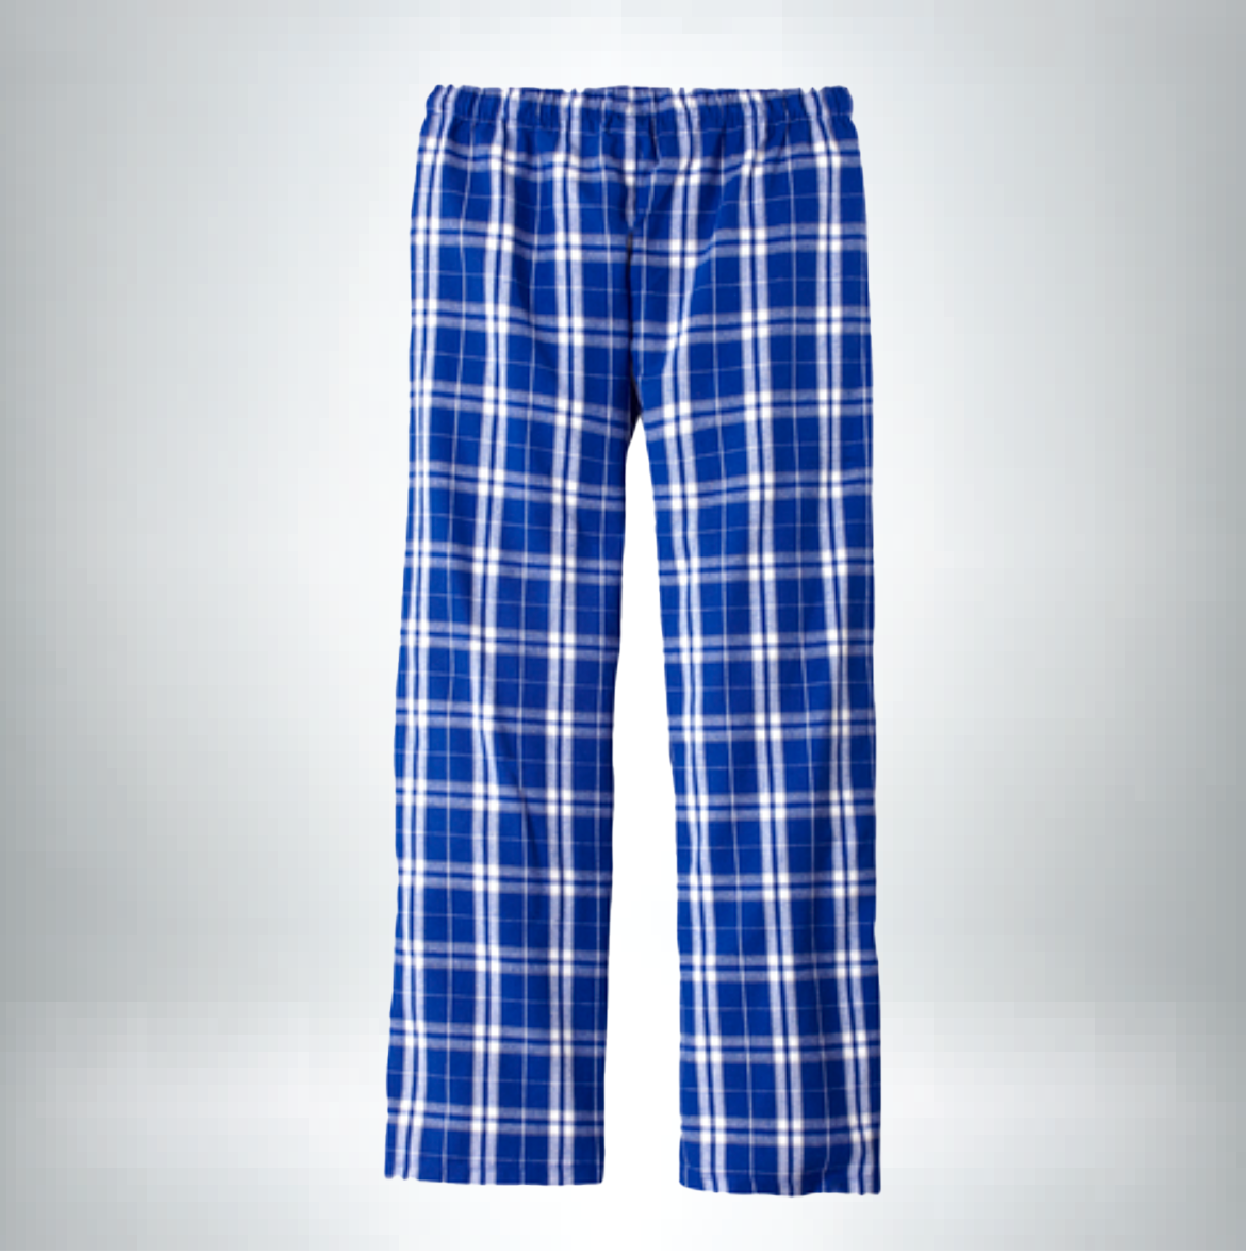 HB Volleyball Unisex Flannel Plaid Pants DT1800